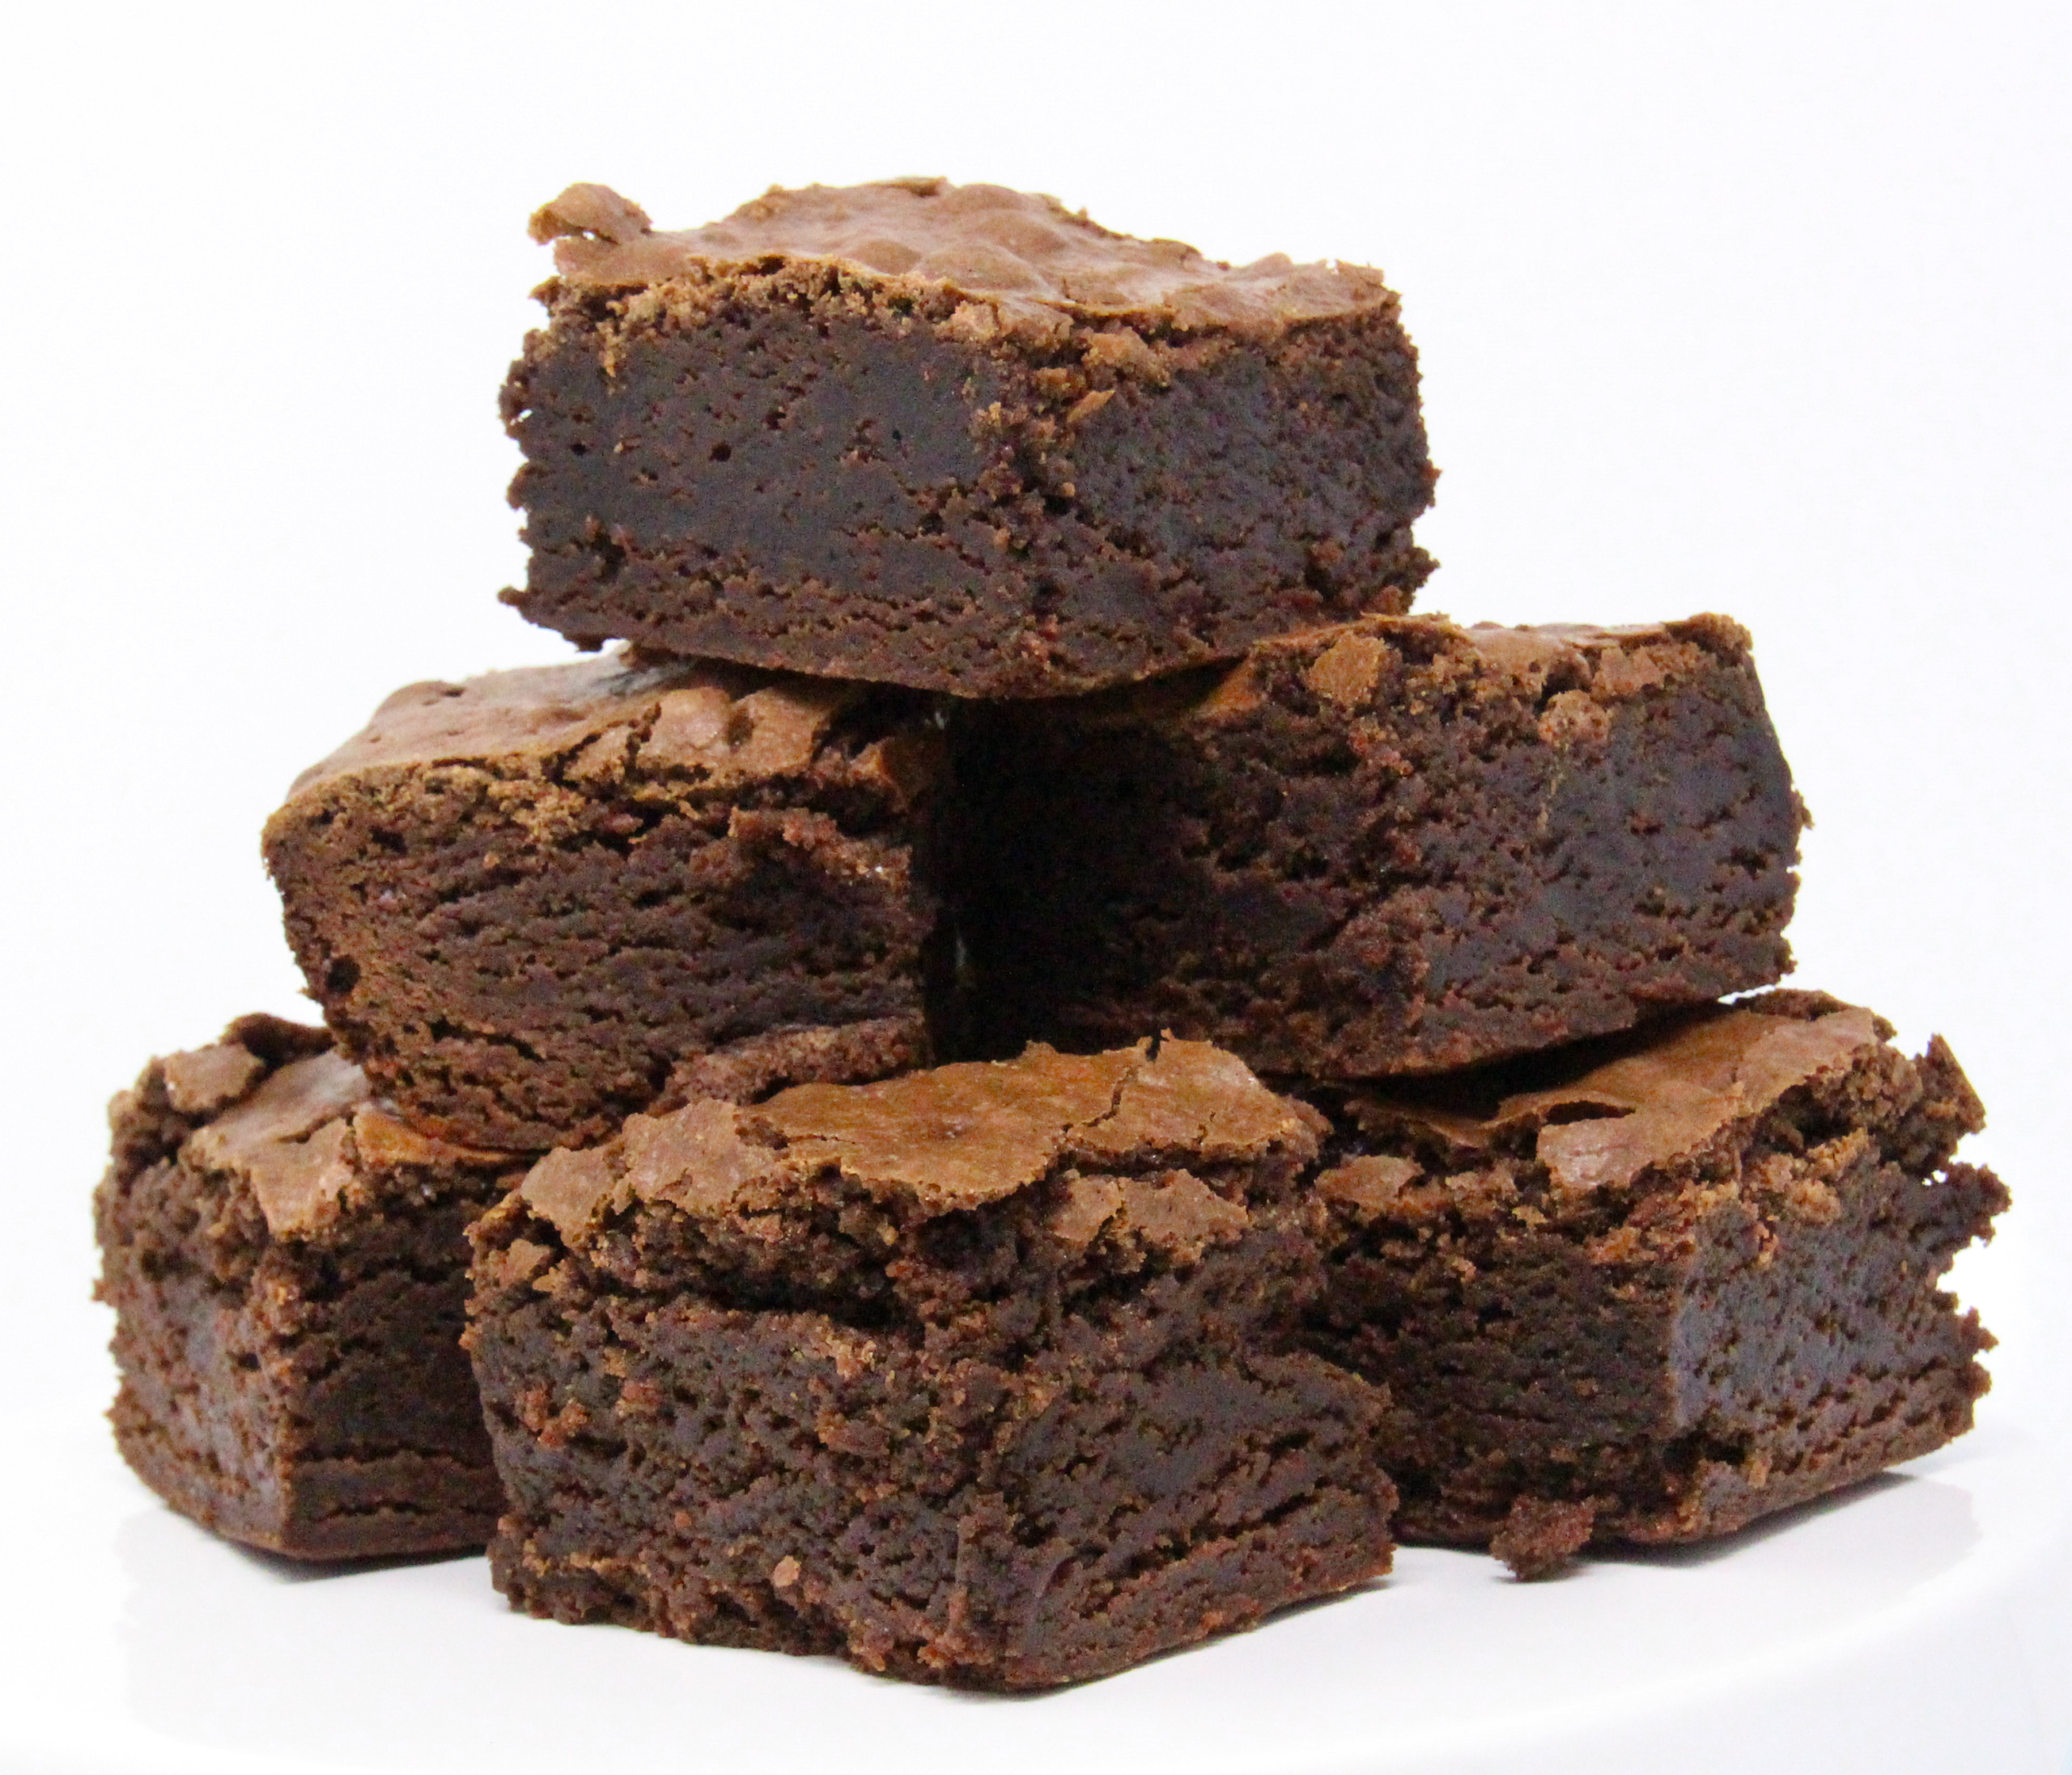 Ground Rules Espresso Brownies are oh-so-rich… and chocolaty. The added espresso raises the deliciousness factor and magnifies the yummy taste of chocolate. Recipe shared with permission granted by Emmeline Duncan, author of FLAT WHITE FATALITY. 